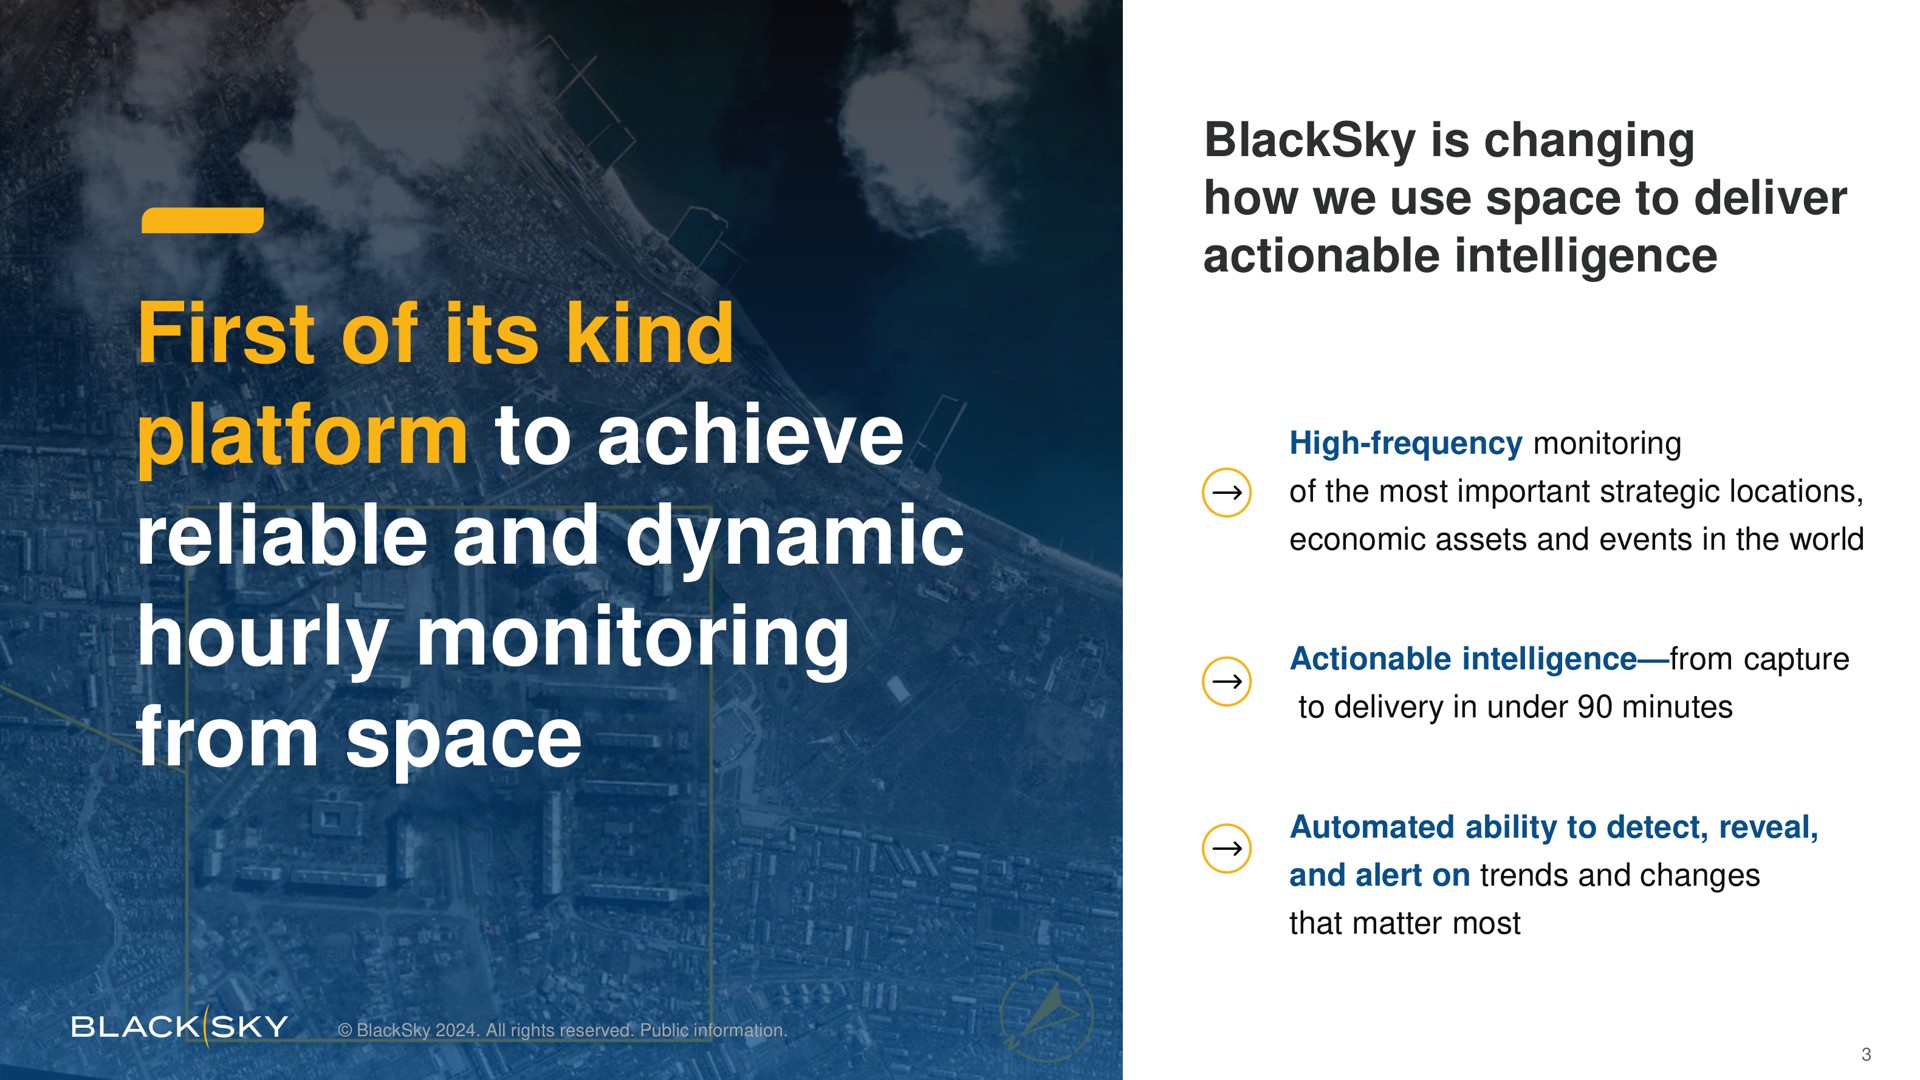 is changing how we use space to deliver actionable intelligence first of its kind platform to achieve reliable and dynamic hourly monitoring from space sedan economic events in he word capture | BlackSky